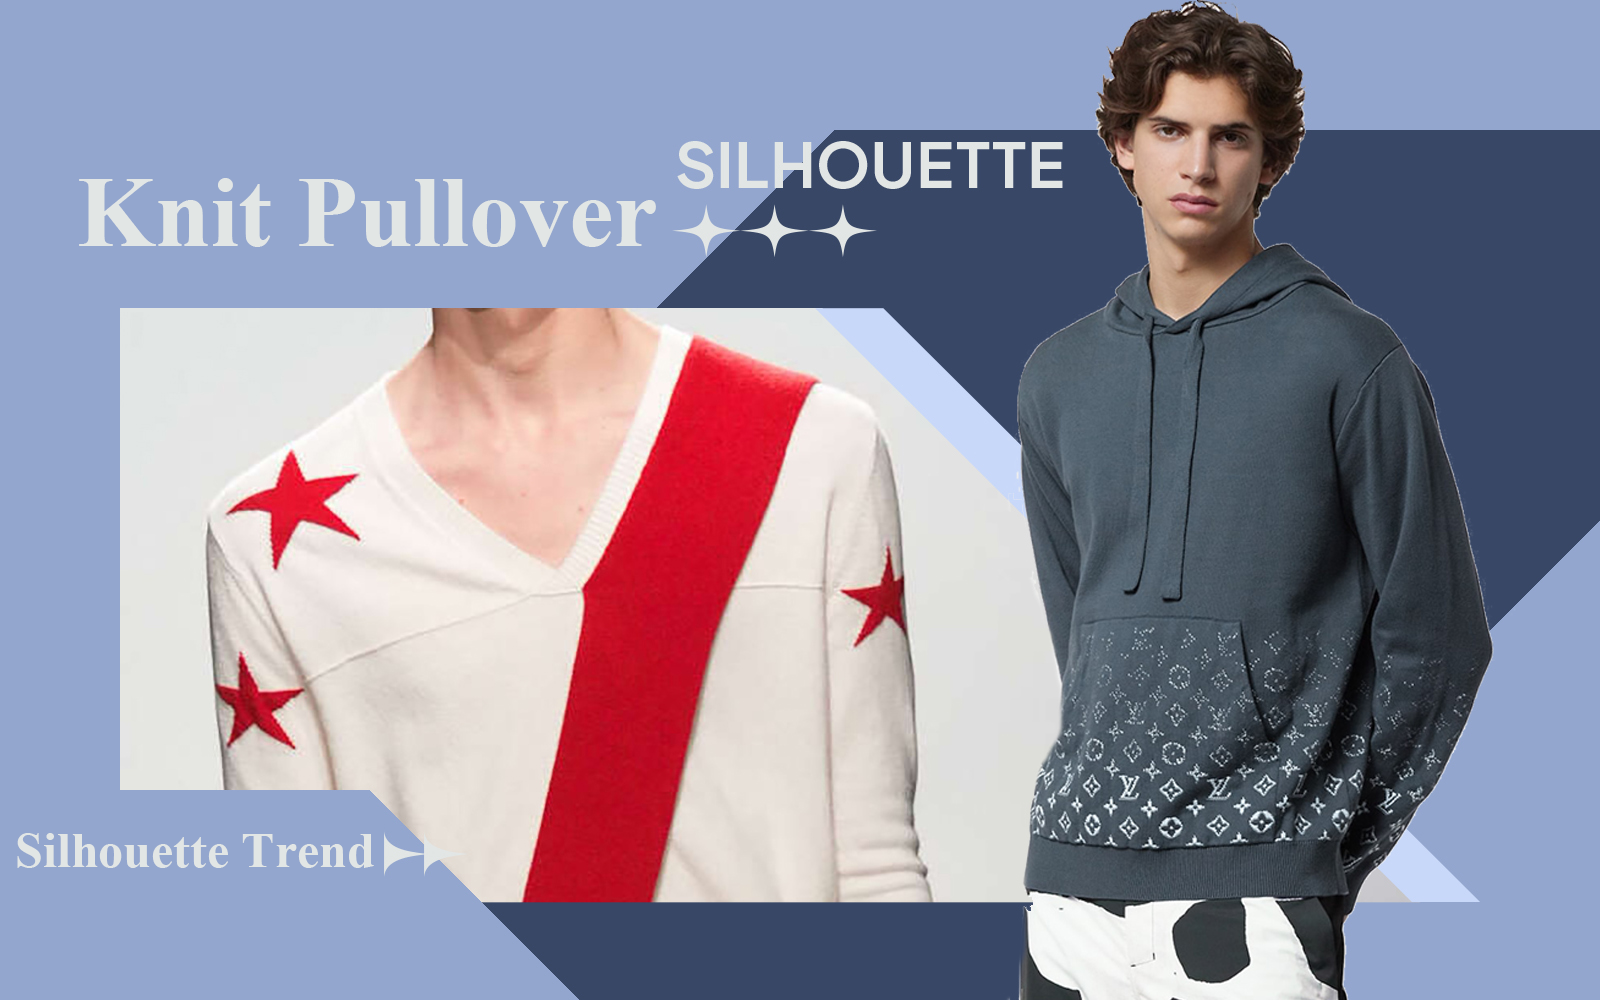 Practical Dressing -- The Silhouette Trend for Men's Pullover